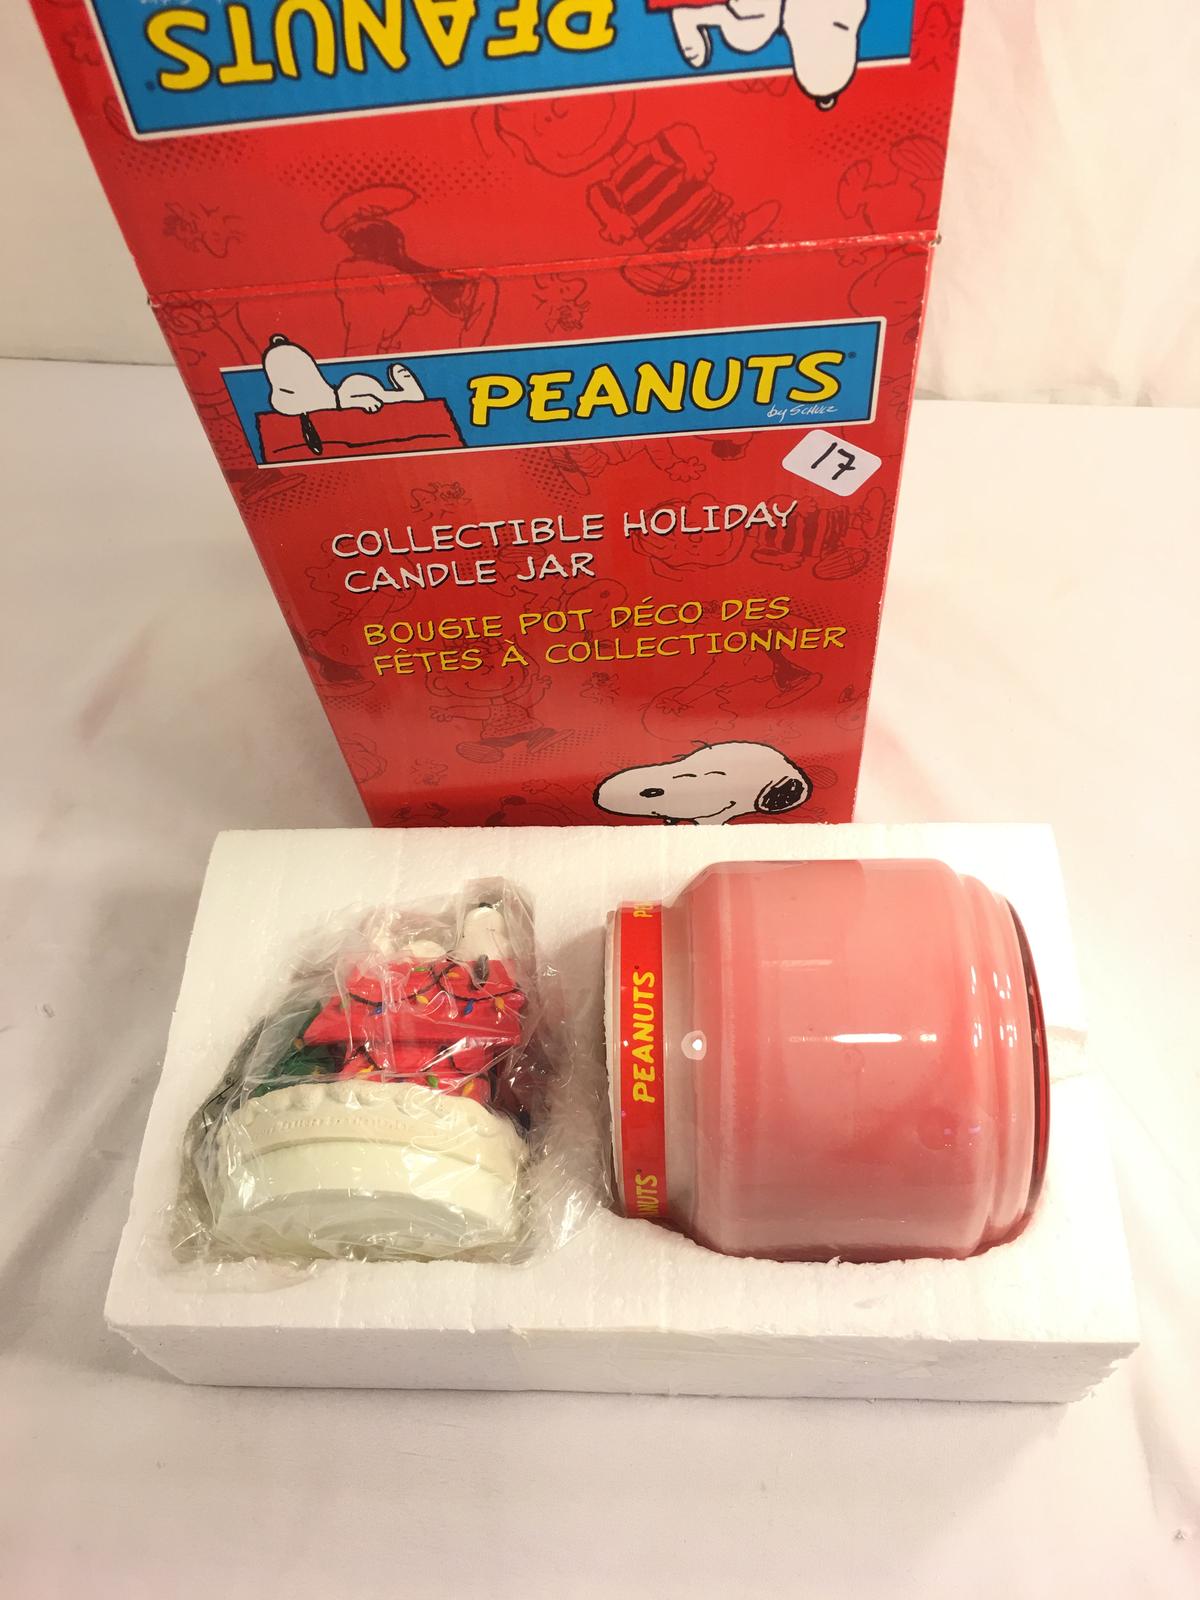 Collector Peanuts Collectible Holiday Candle Jar Figurine Box Size: 10"tall Box